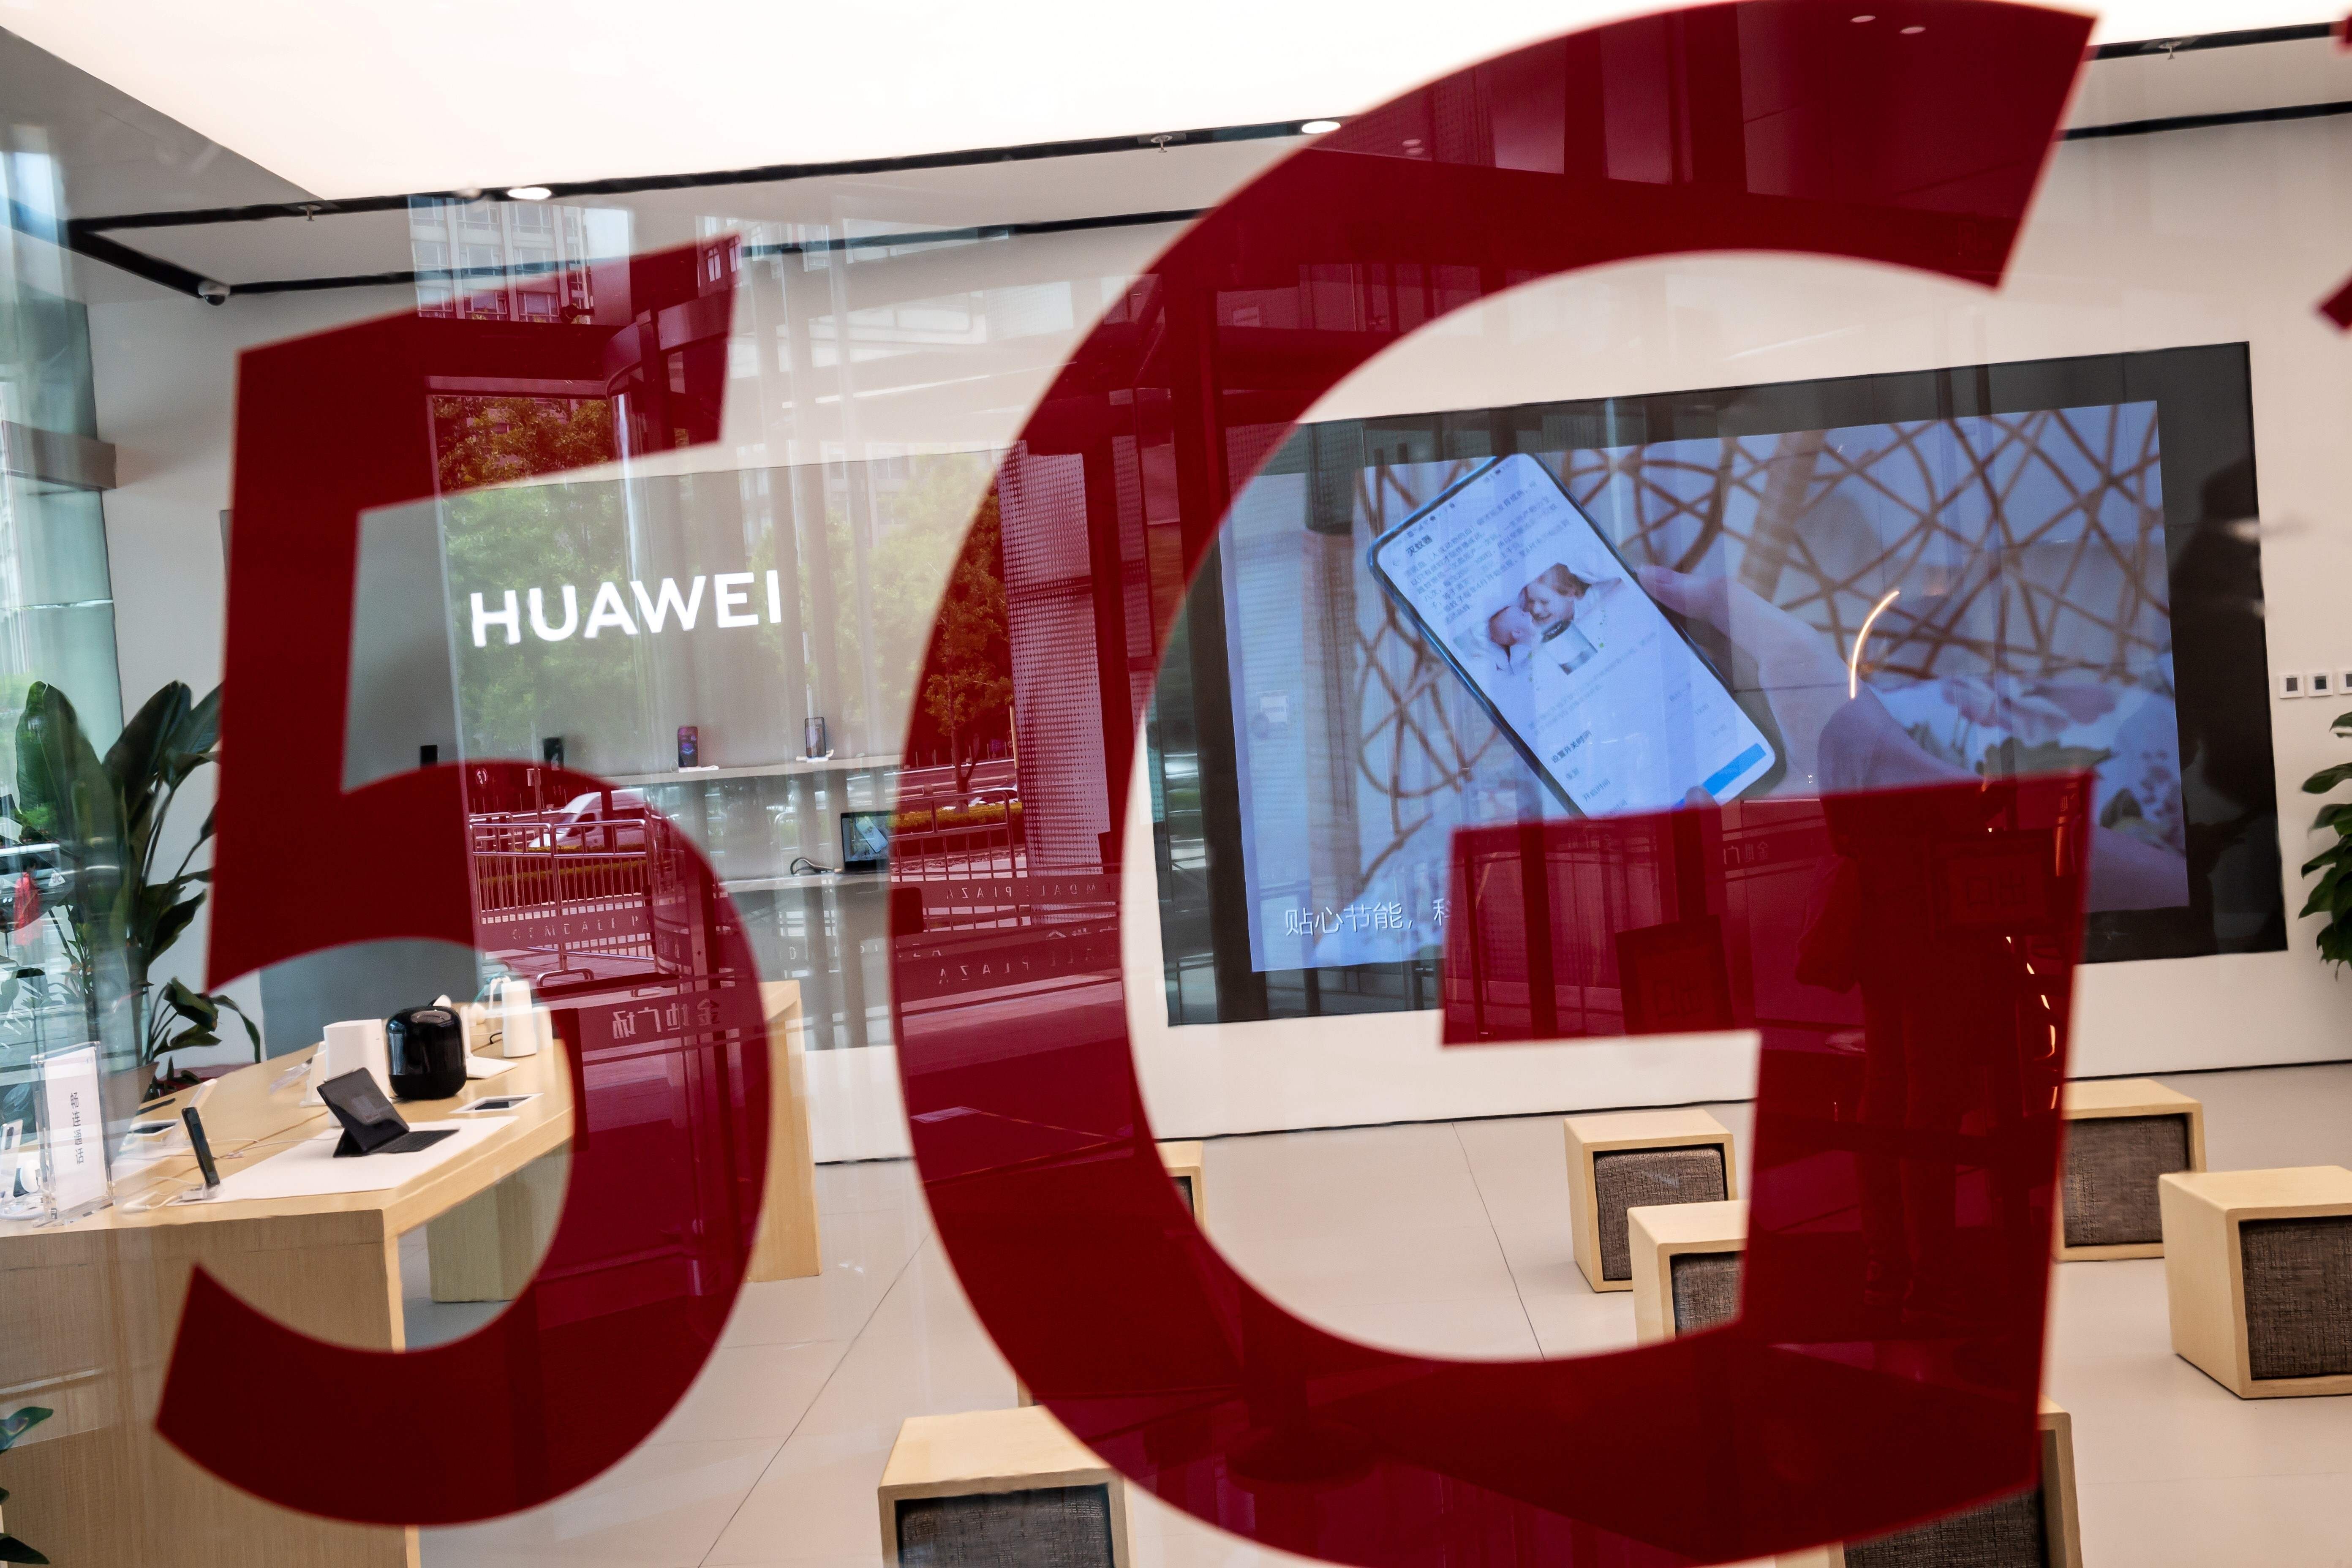 A shop for Chinese telecom giant Huawei displays a 5G logo in Beijing on May 25, 2020. Photo: AFP